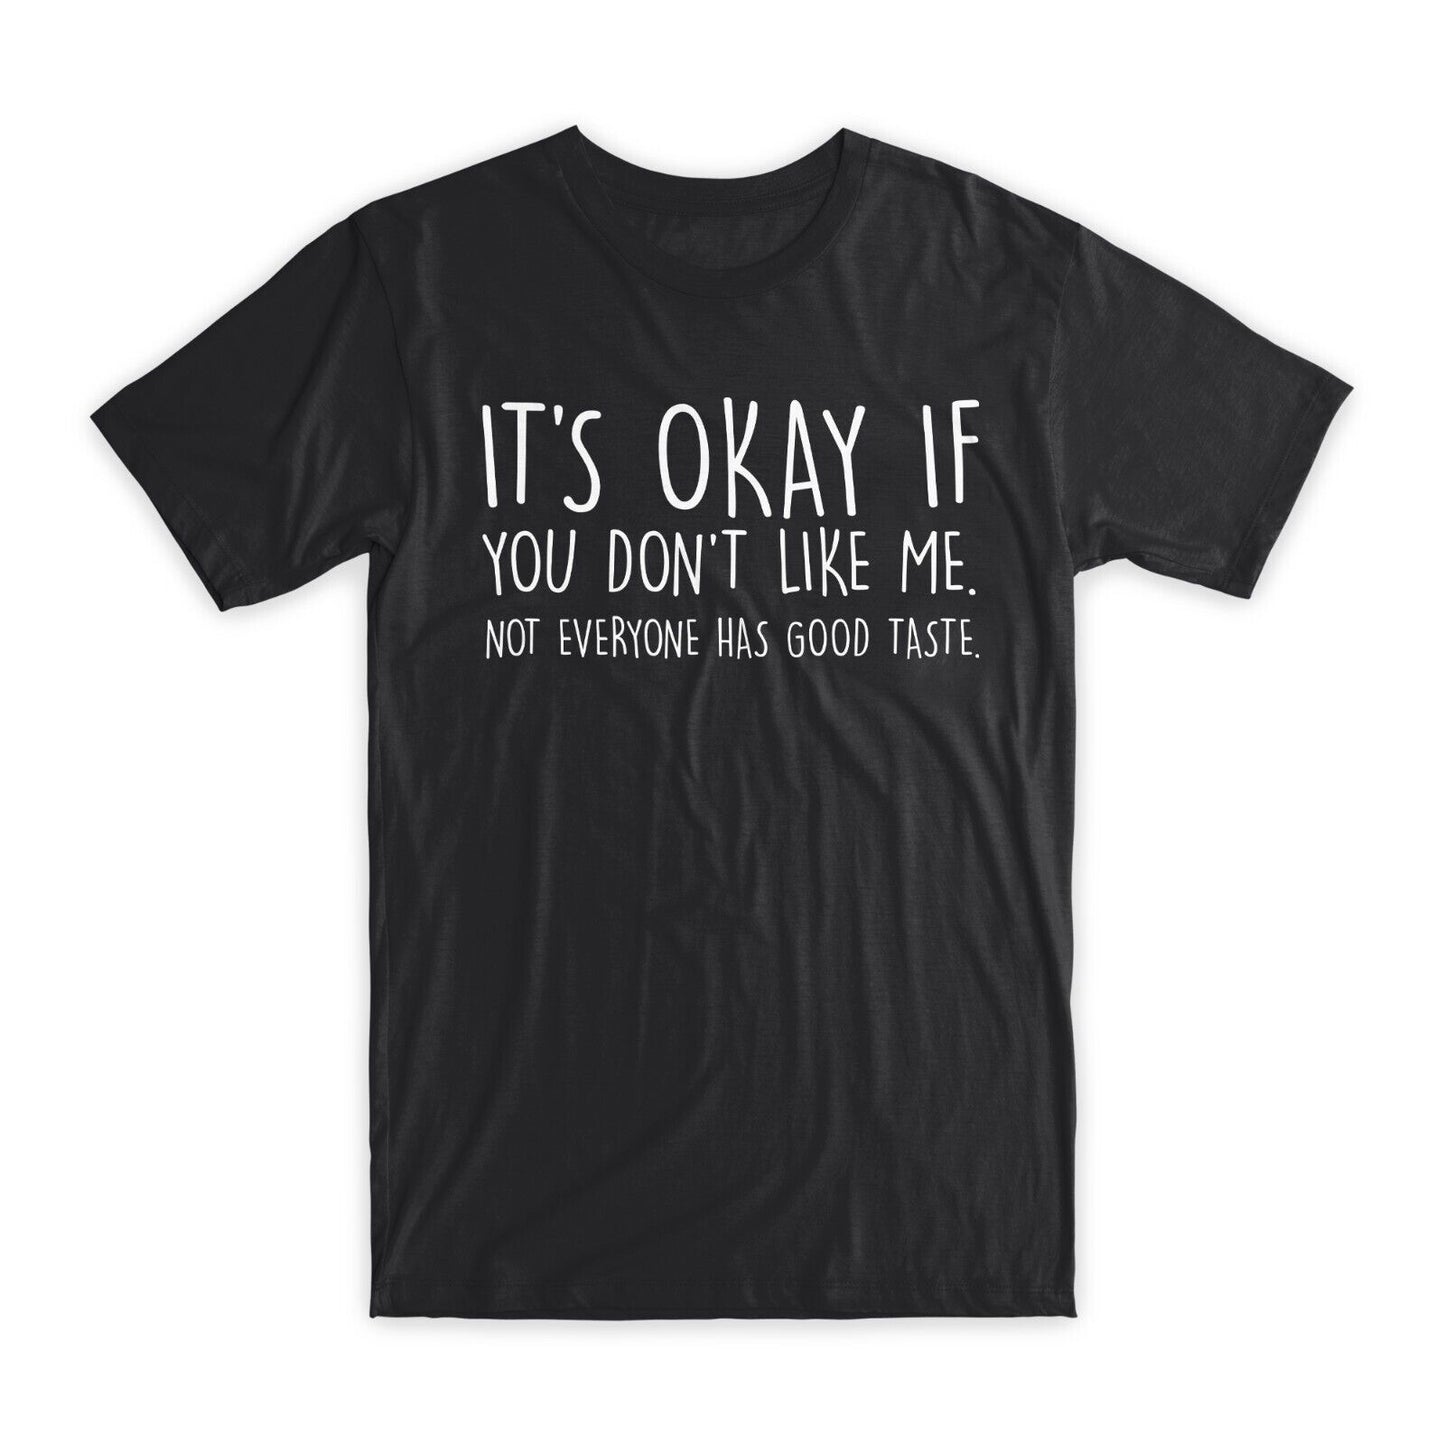 It's Okay If You Don't Like Me T-Shirt Premium Soft Cotton Funny Tees Gifts NEW